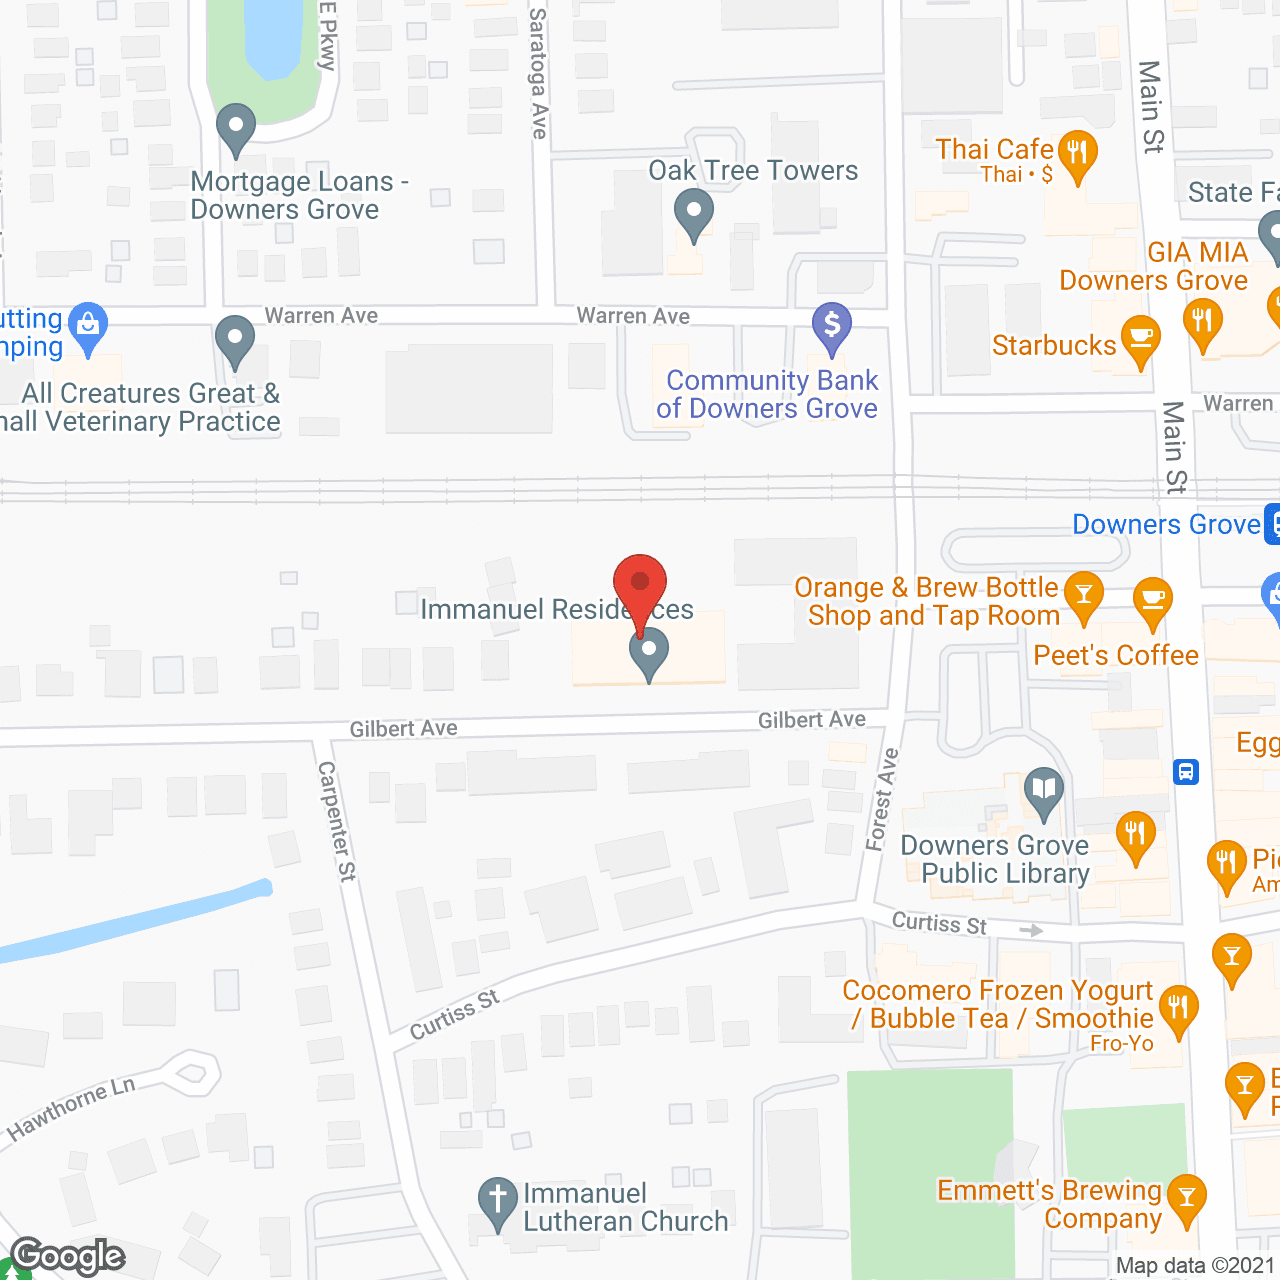 Immanuel Residences in google map